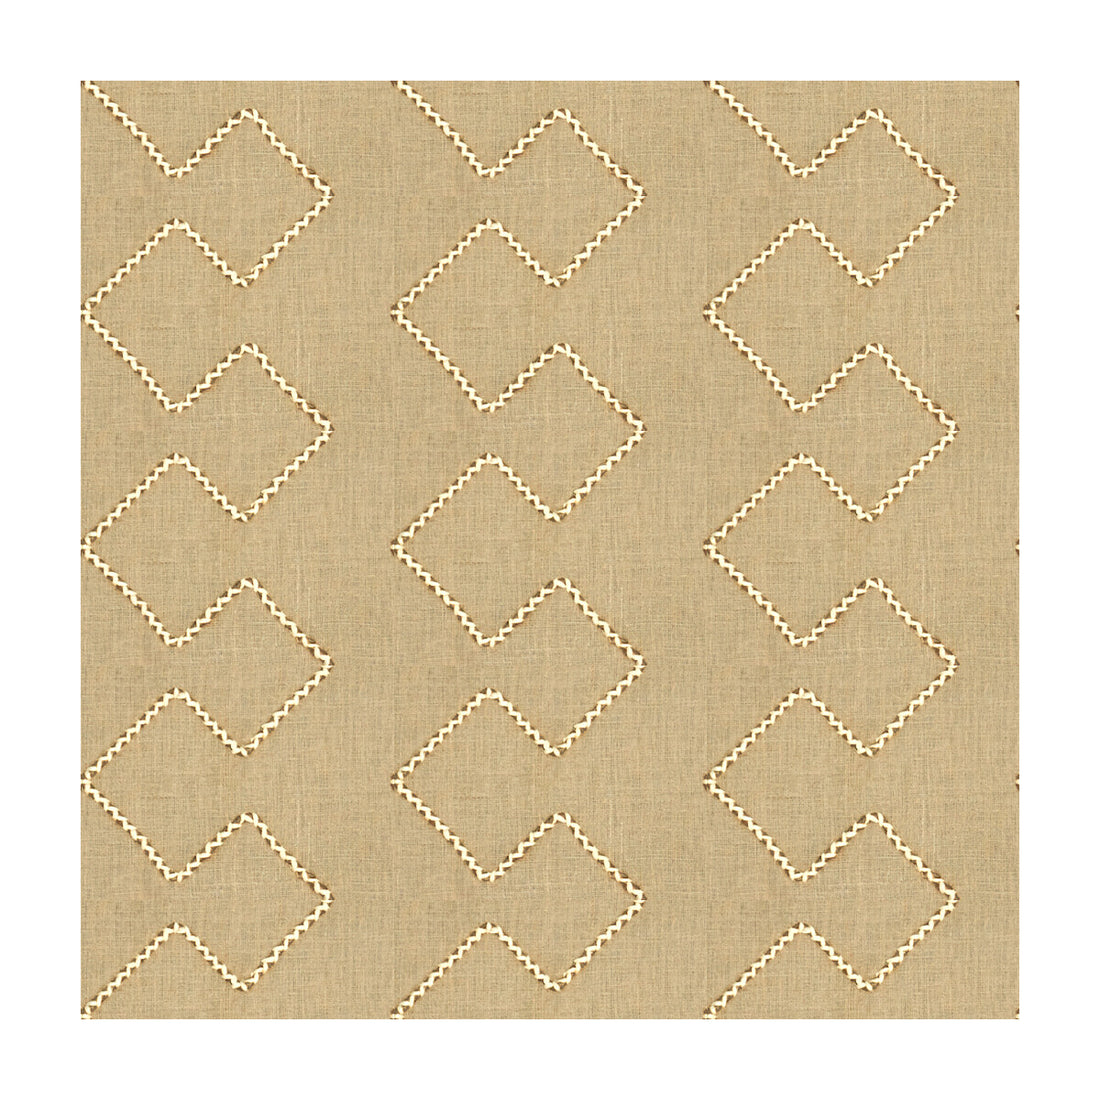 Mythical Lines fabric in stucco color - pattern 4010.16.0 - by Kravet Design in the Museum Of New Mexico collection